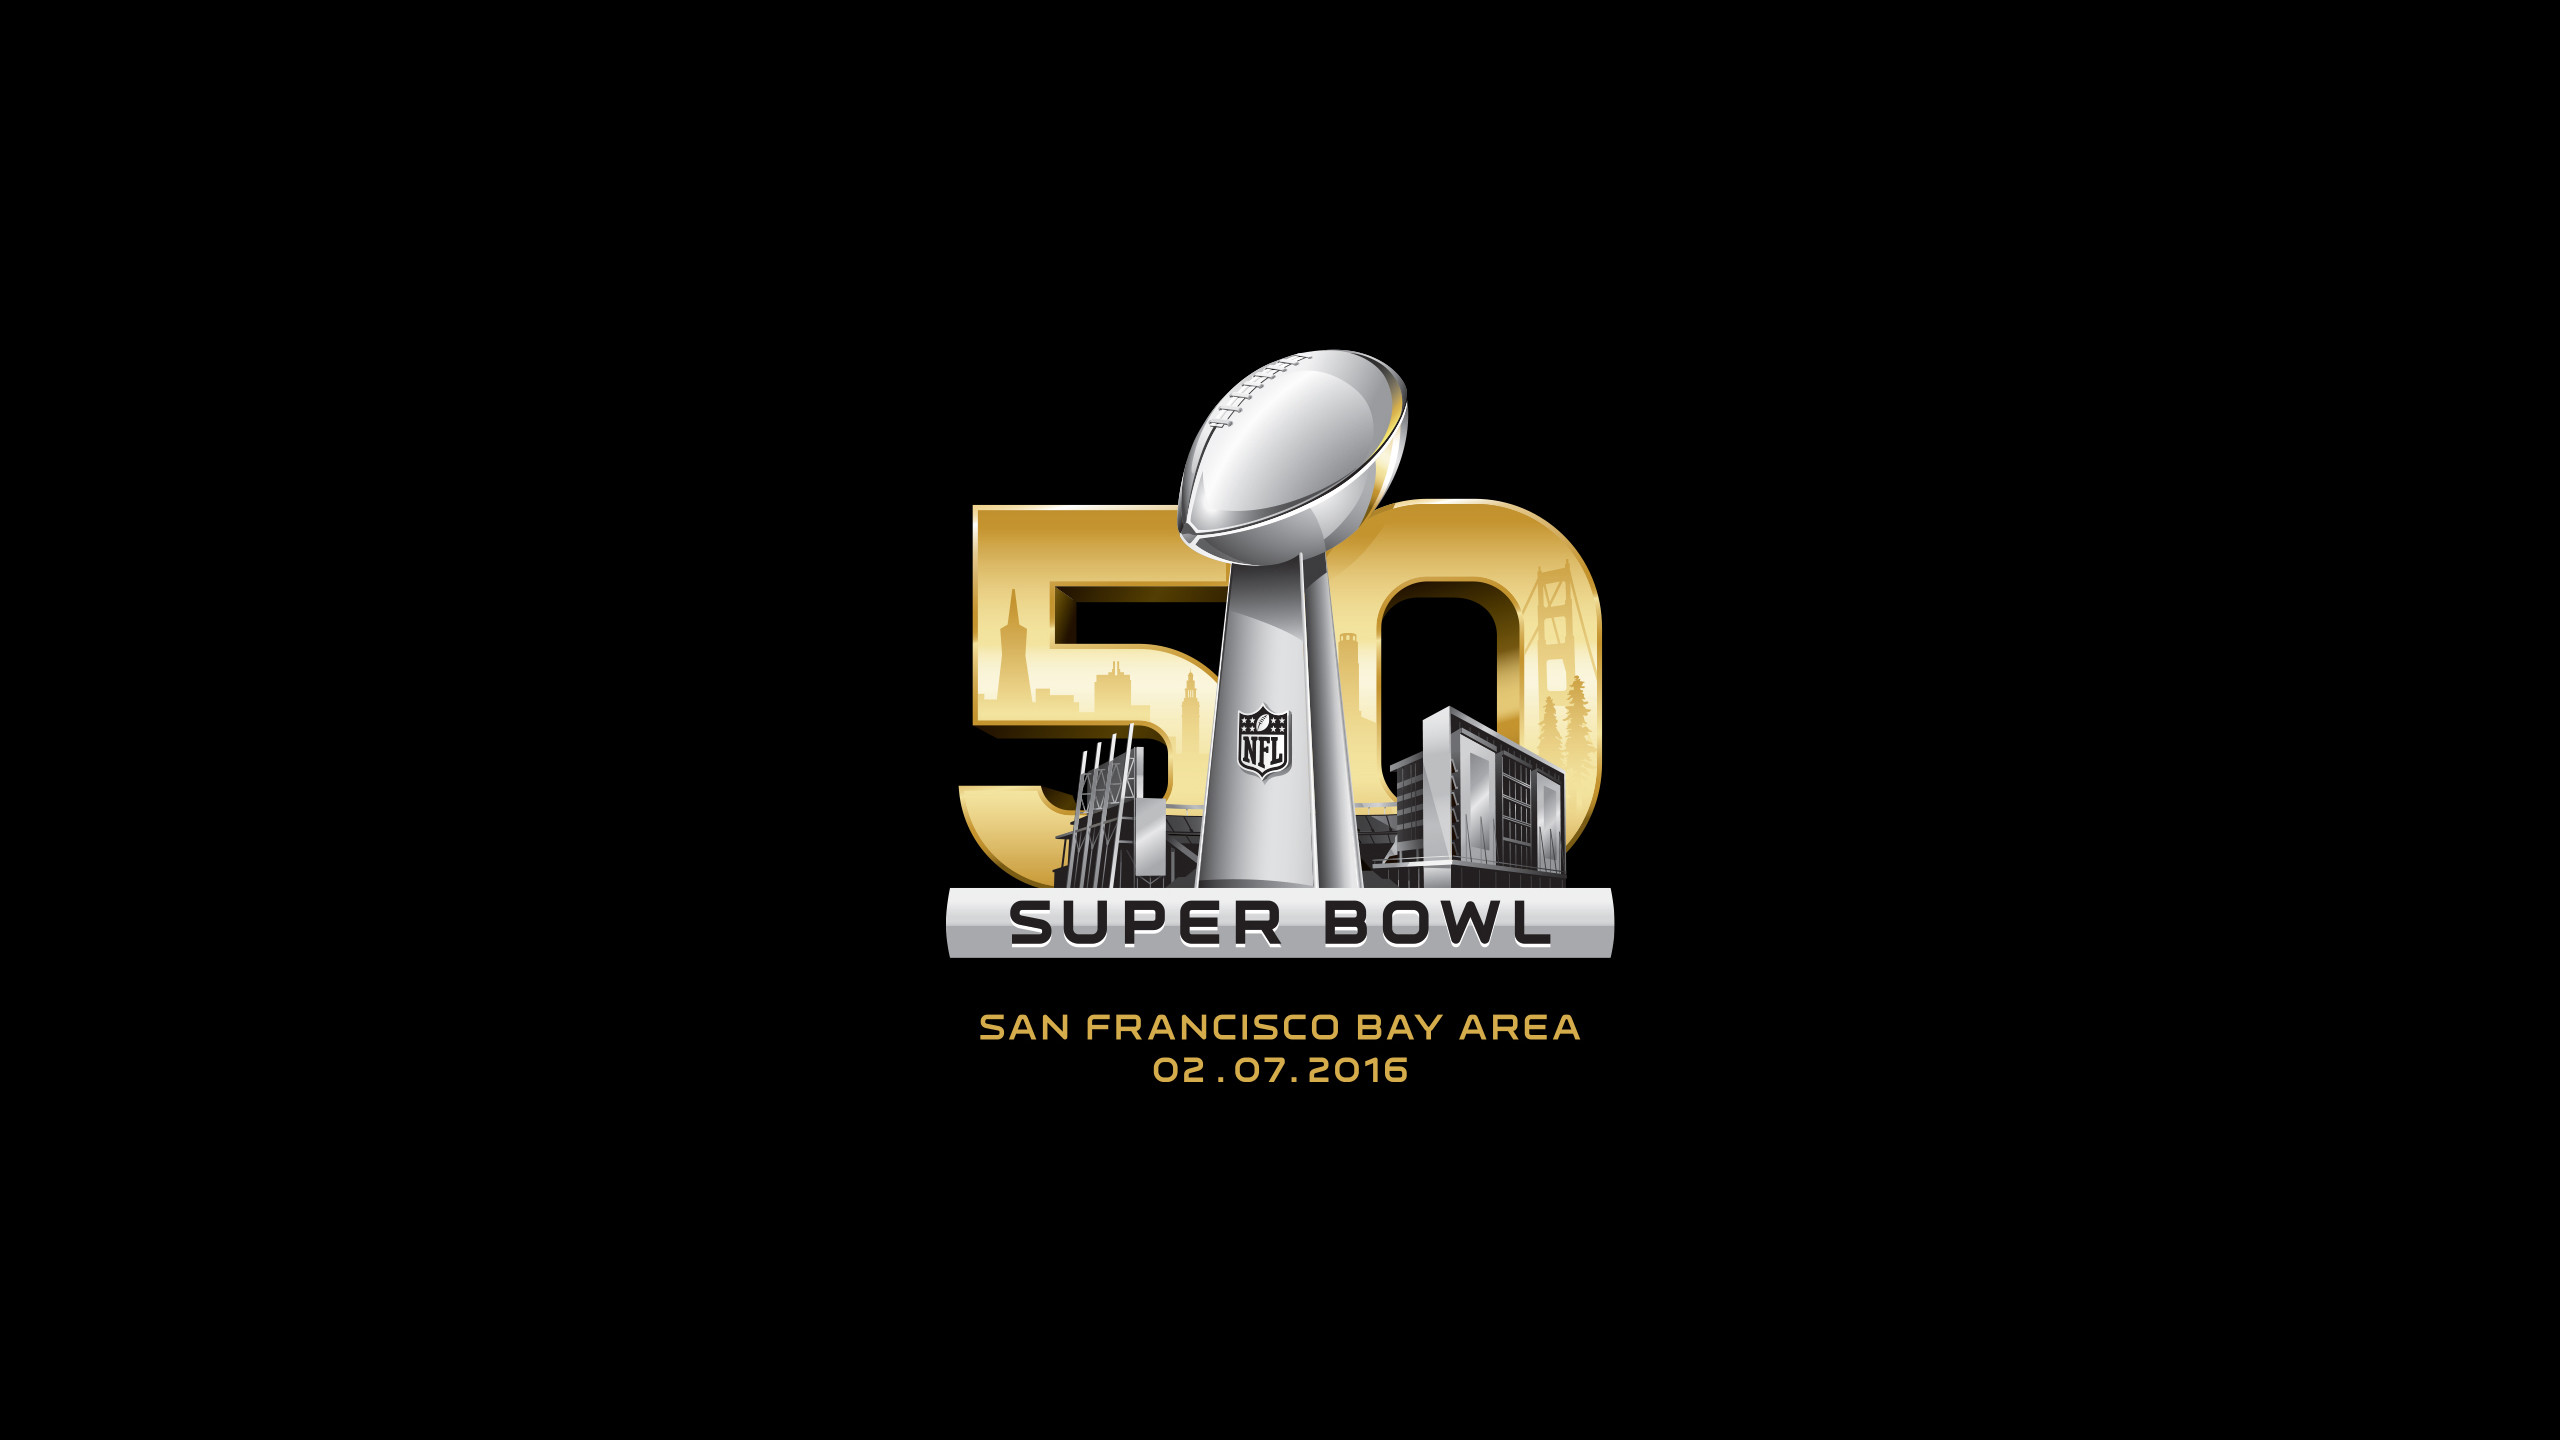 2560x1440 SUPER BOWL 50 WALLPAPERS FREE Wallpapers Background images 